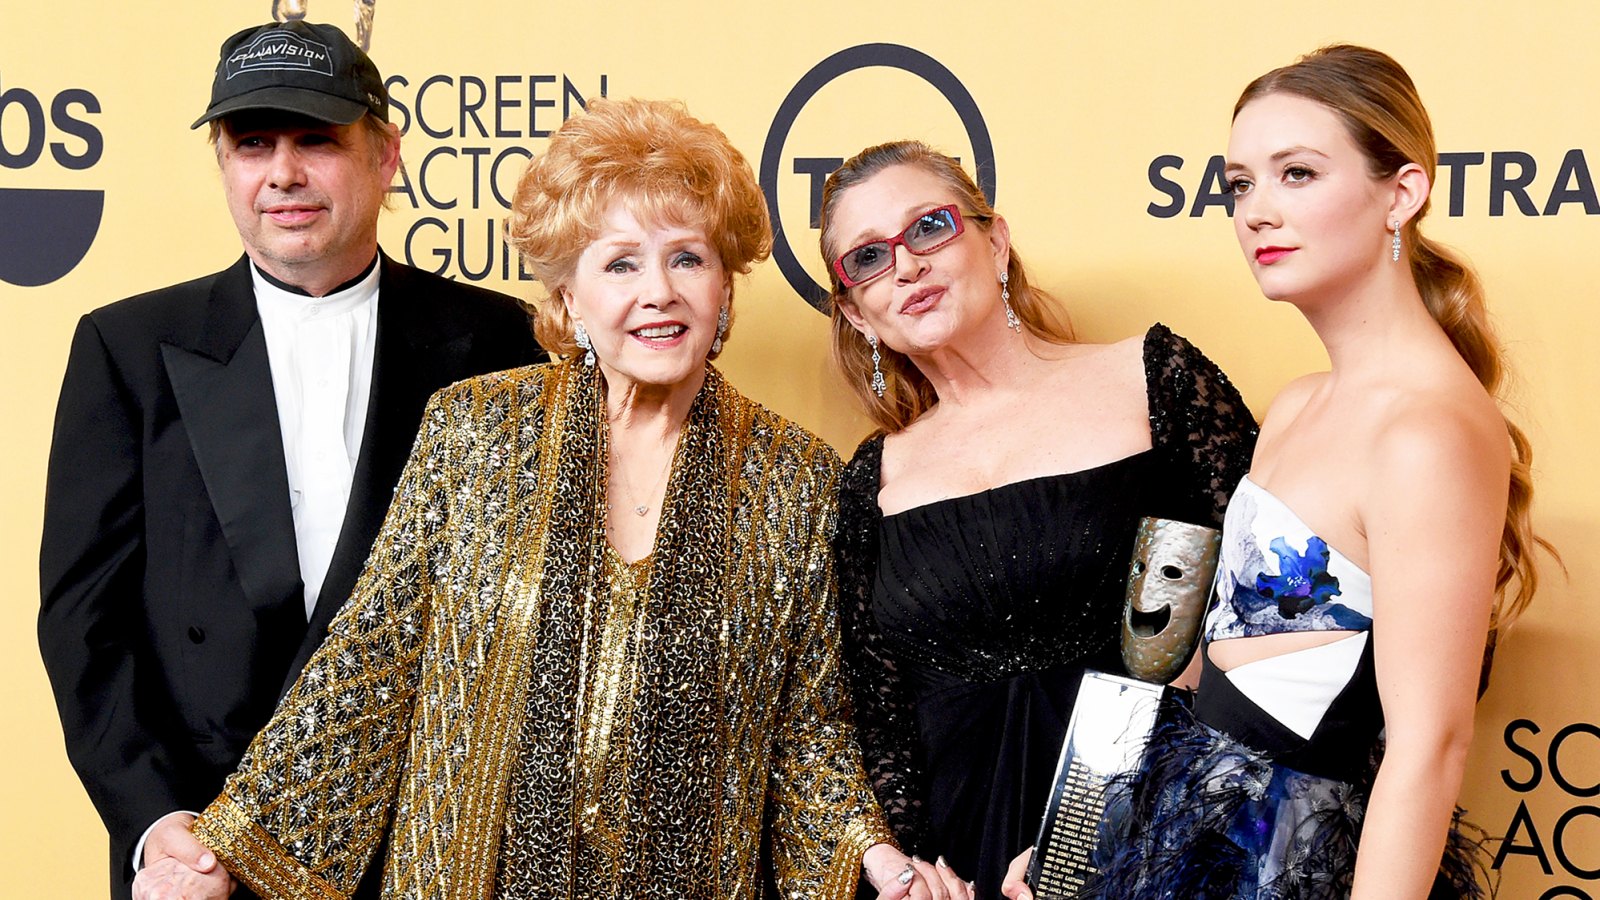 Todd Fisher, Debbie Reynolds, Carrie Fisher and Billie Lourd